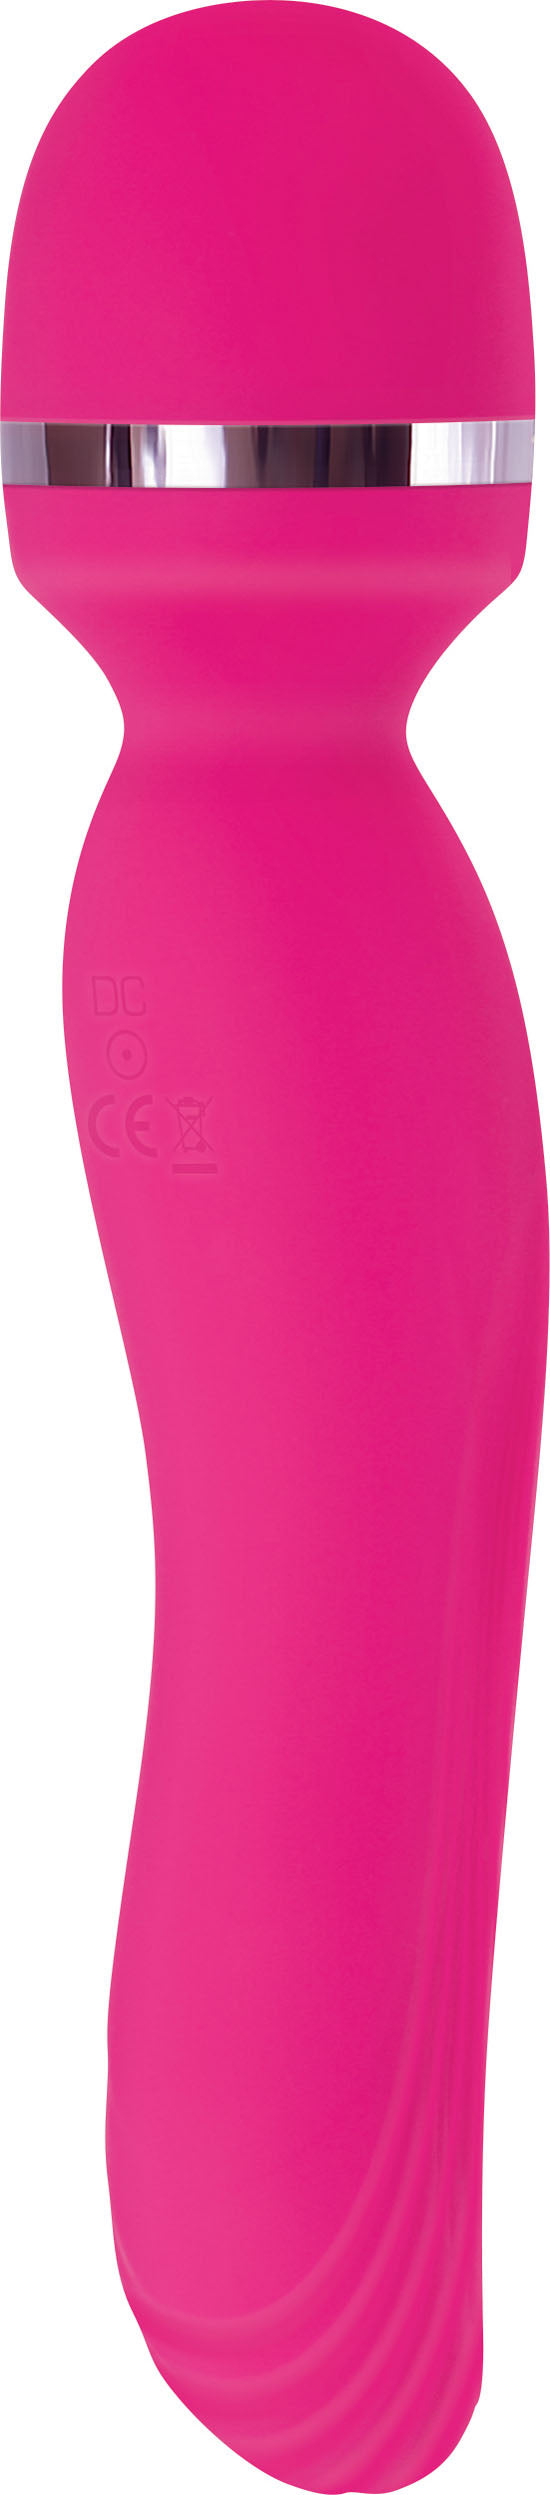 Adam & Eve Intimate Curves Rechargeable Wand AE-BL-3091-2